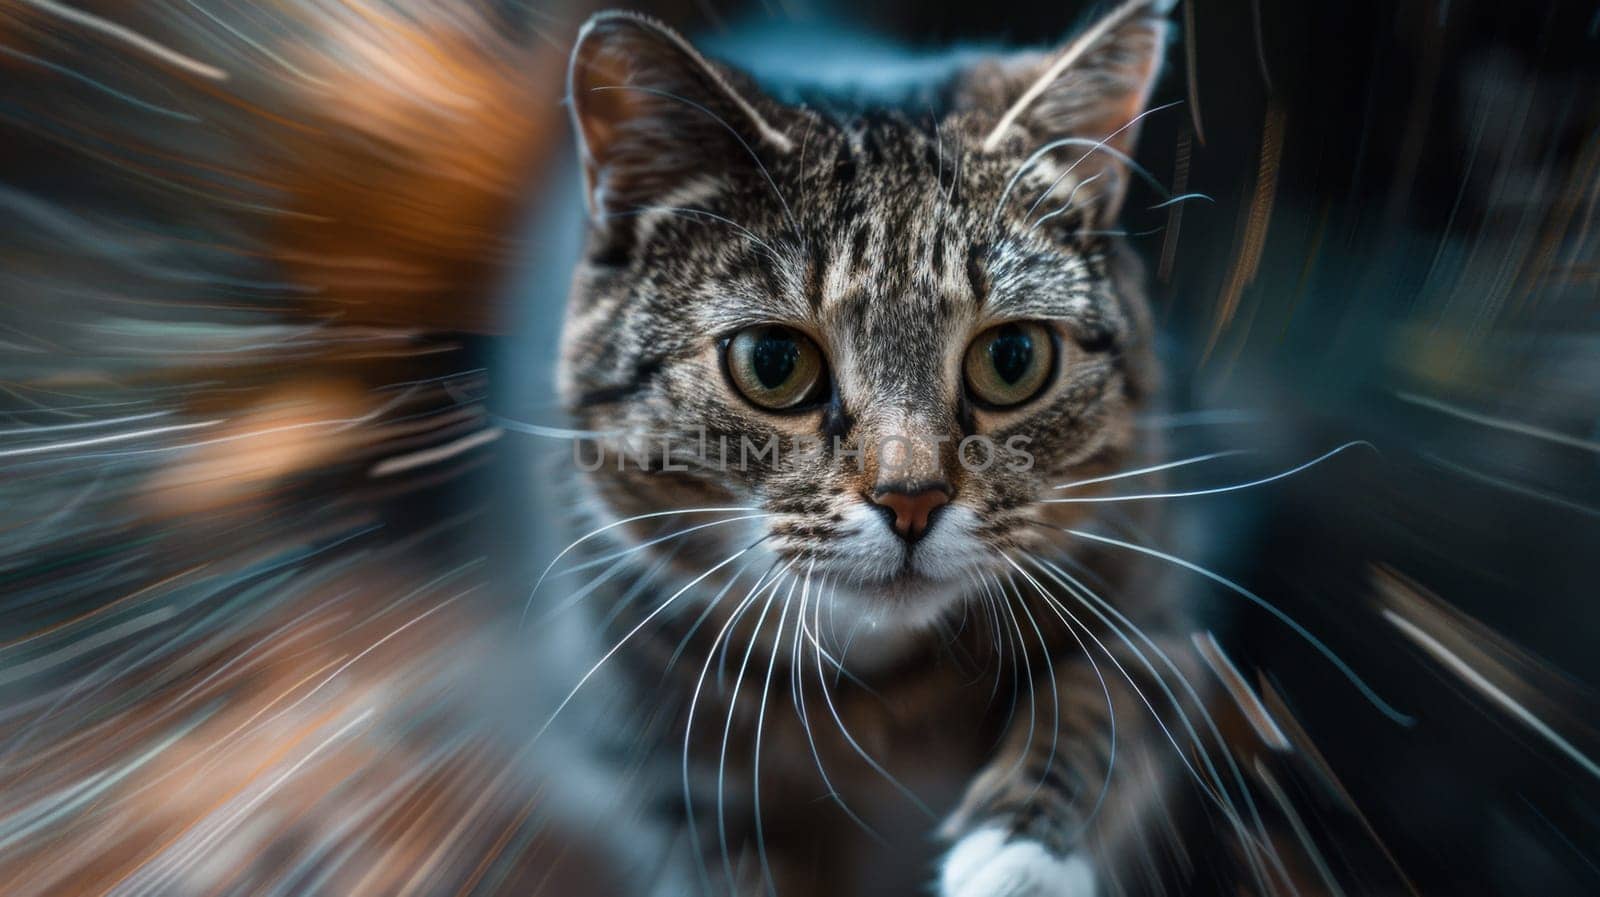 A close up of a cat walking on the floor with blurry background